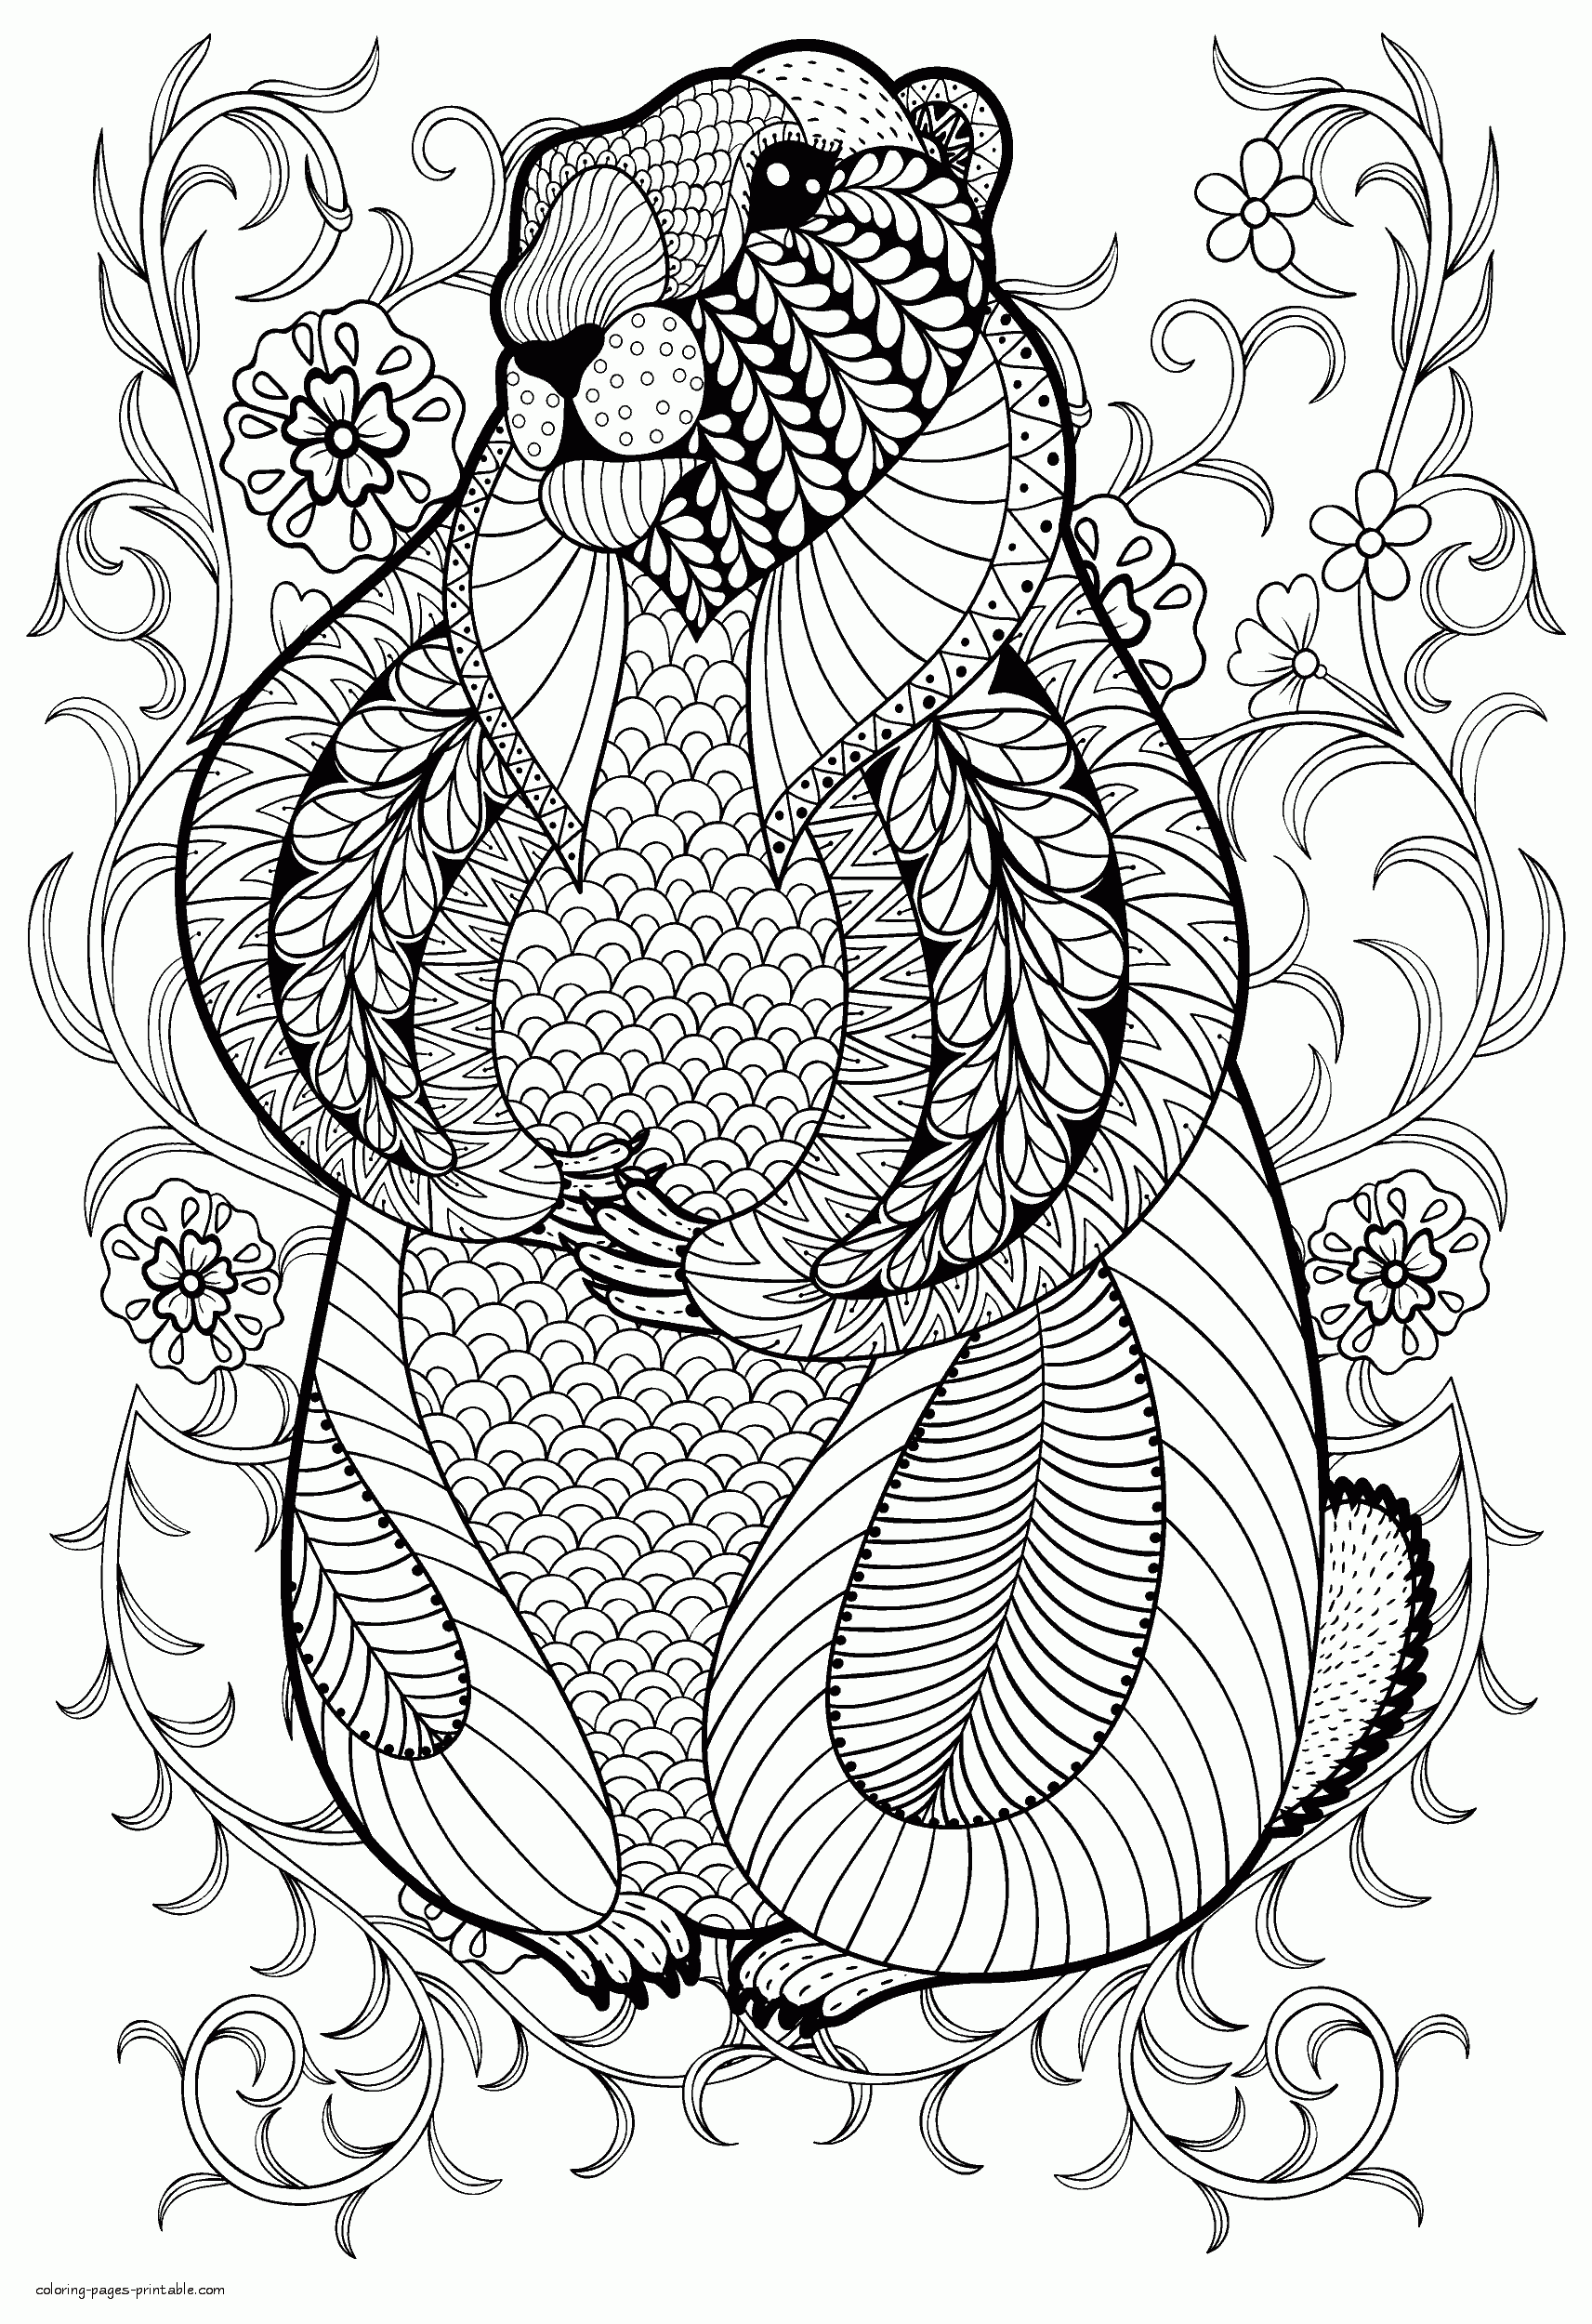 Adult Coloring Book Pages Animals COLORING PAGES PRINTABLE COM